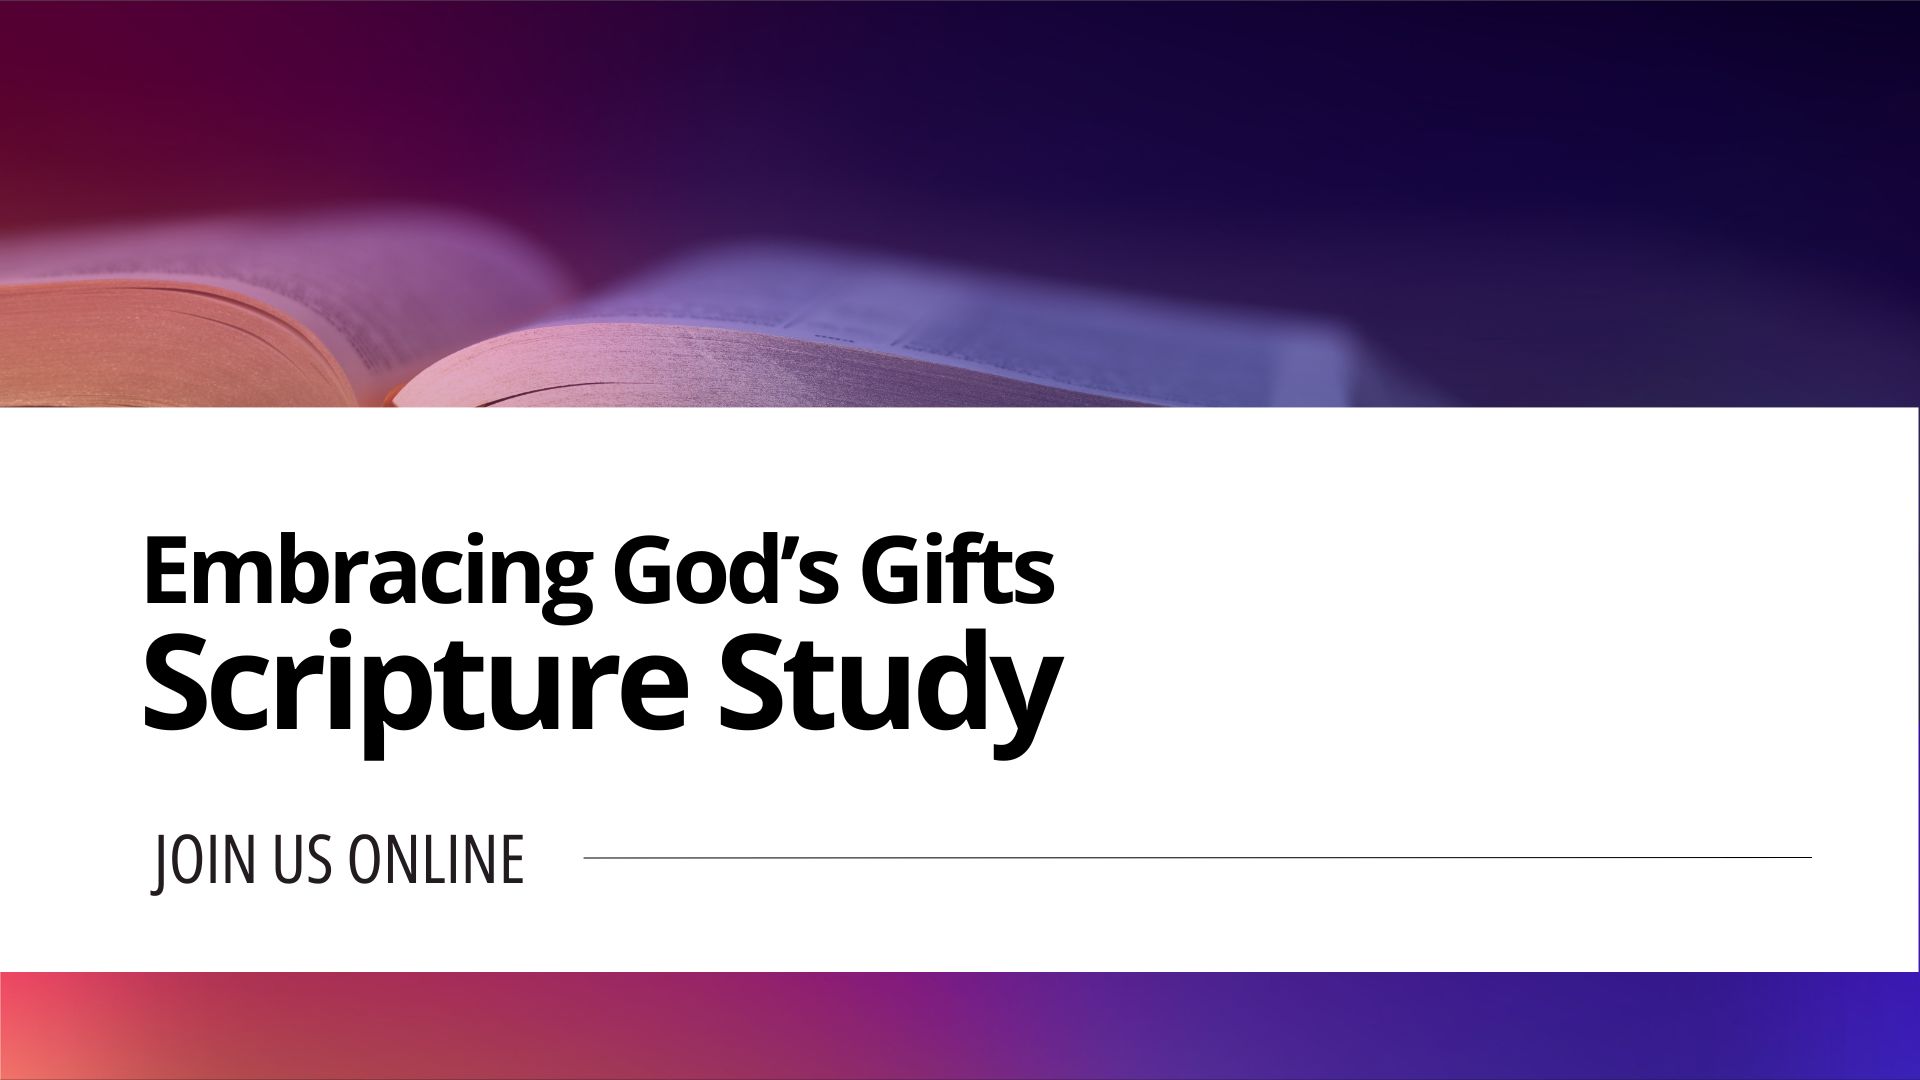 Embracing-Gods-Gifts-Scripture-Study-event-blog-cover-Image image